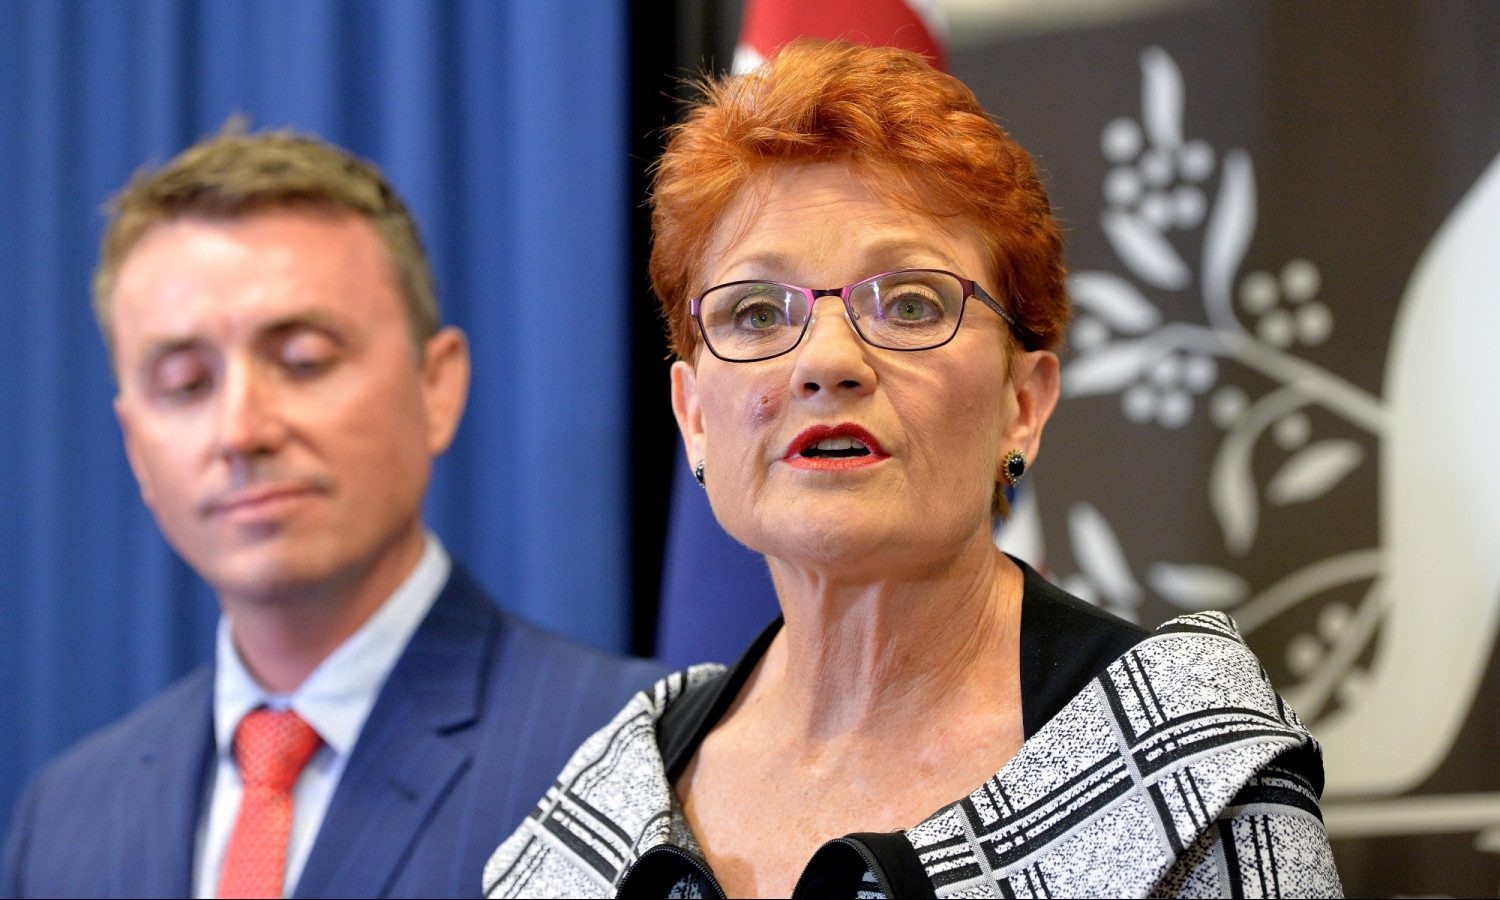 Australia’s Pauline Hanson to Preference Coalition on ‘How to Vote’ Cards in 4 Key Seats